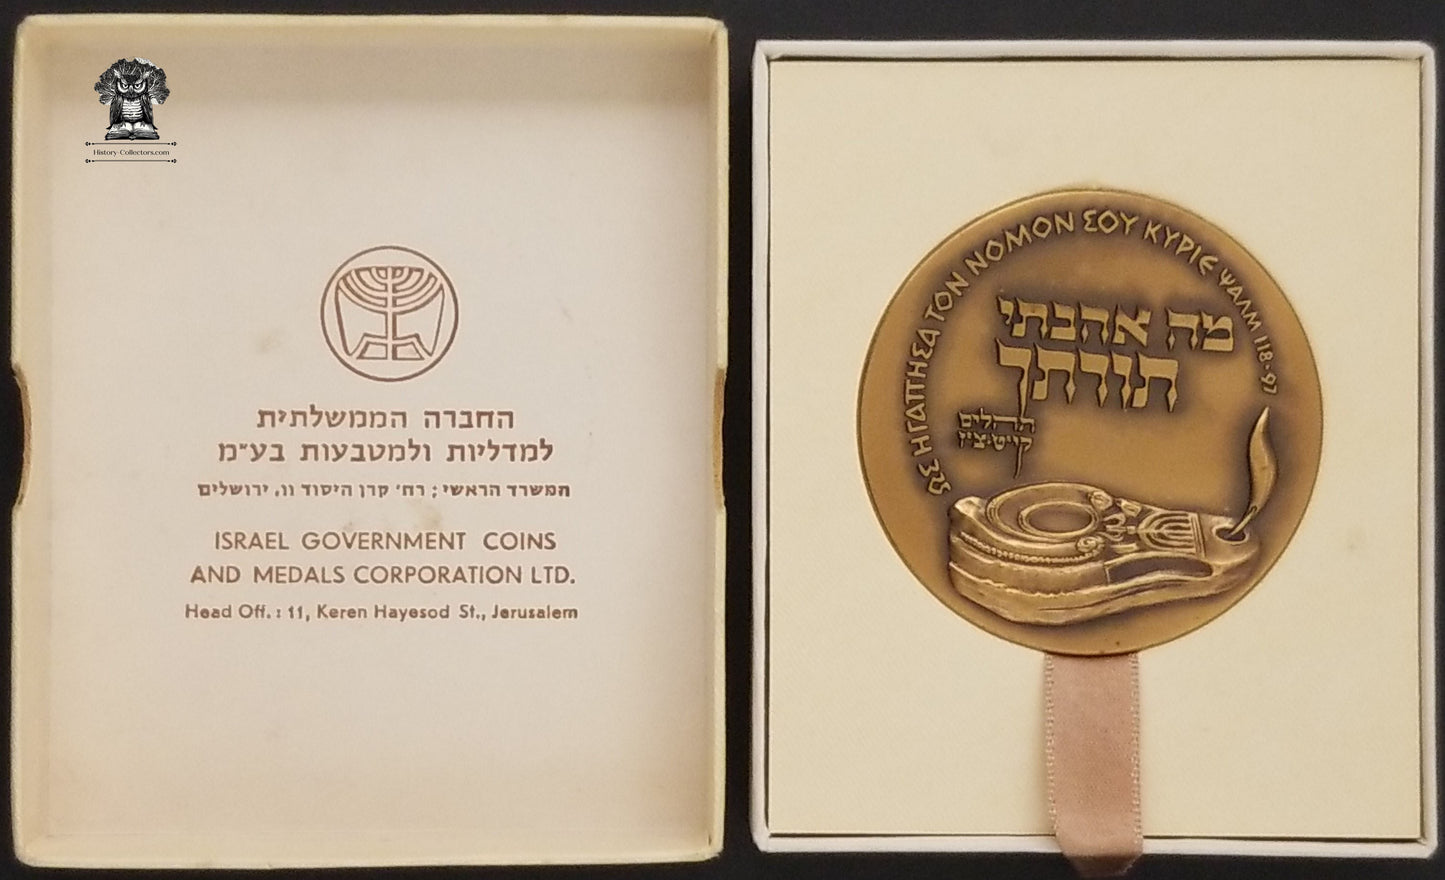 1961 Israel State Medal - Bronze - Second International Bible Contest - Mishnah Talmud